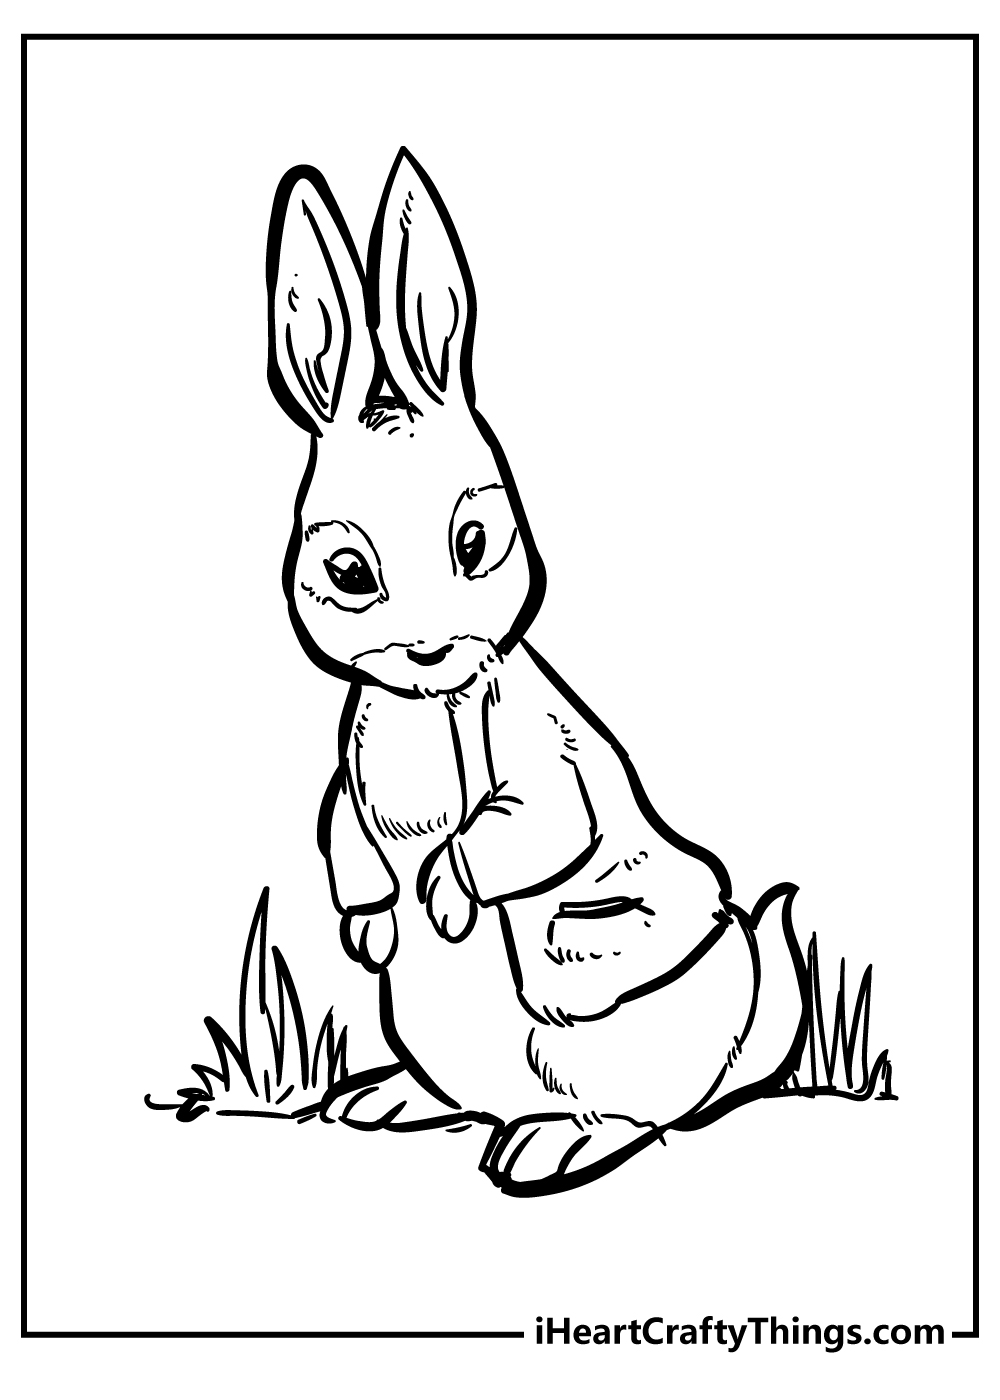 Peter Rabbit Coloring Book for adults free download